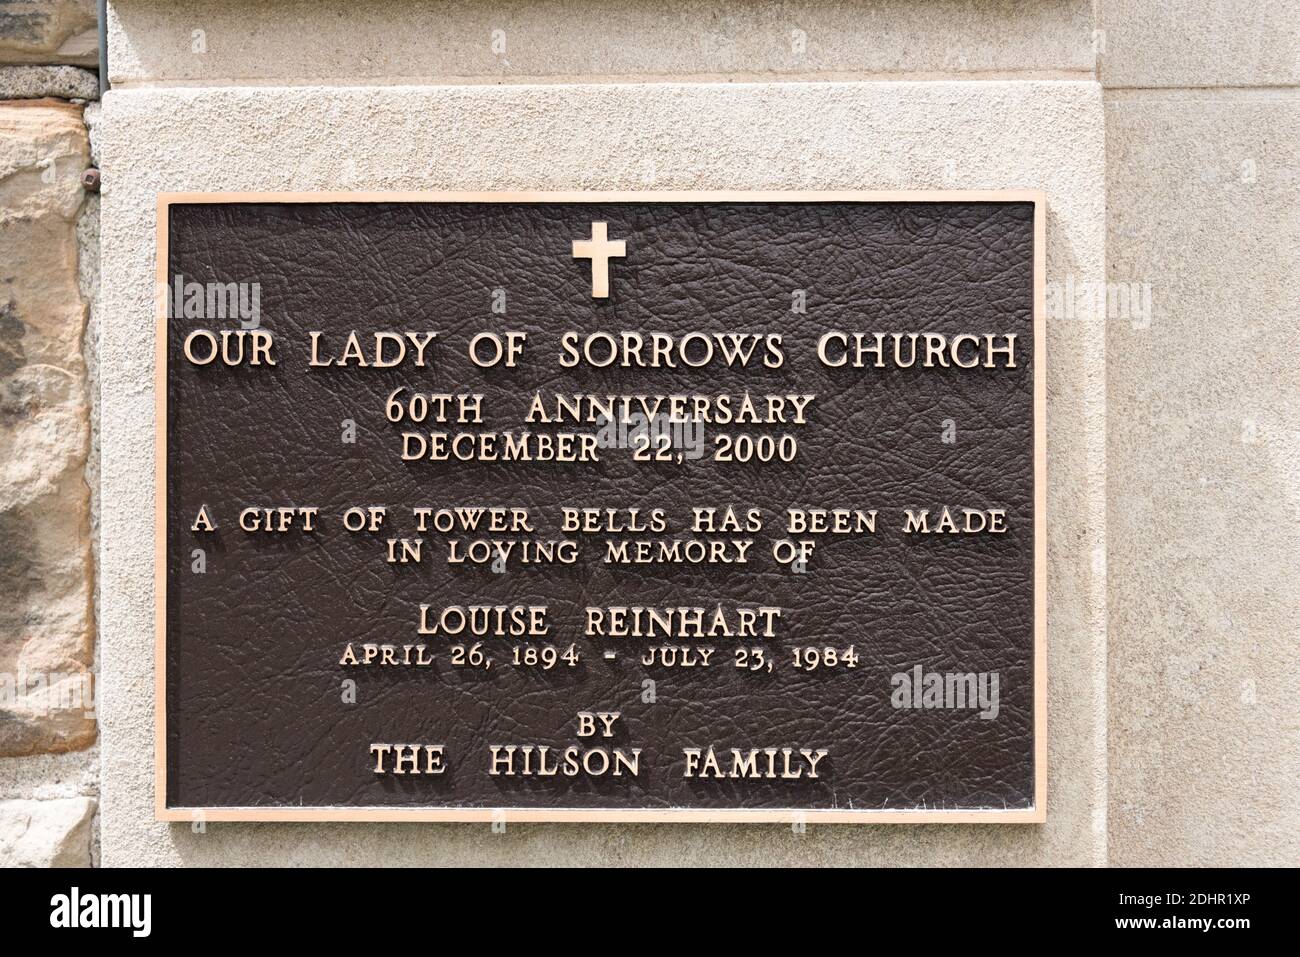 Historic plaque commemorating the 60th Anniversary of Our Lady of Sorrows Roman Catholic Church in Bloor Street West, Toronto, Canada Stock Photo